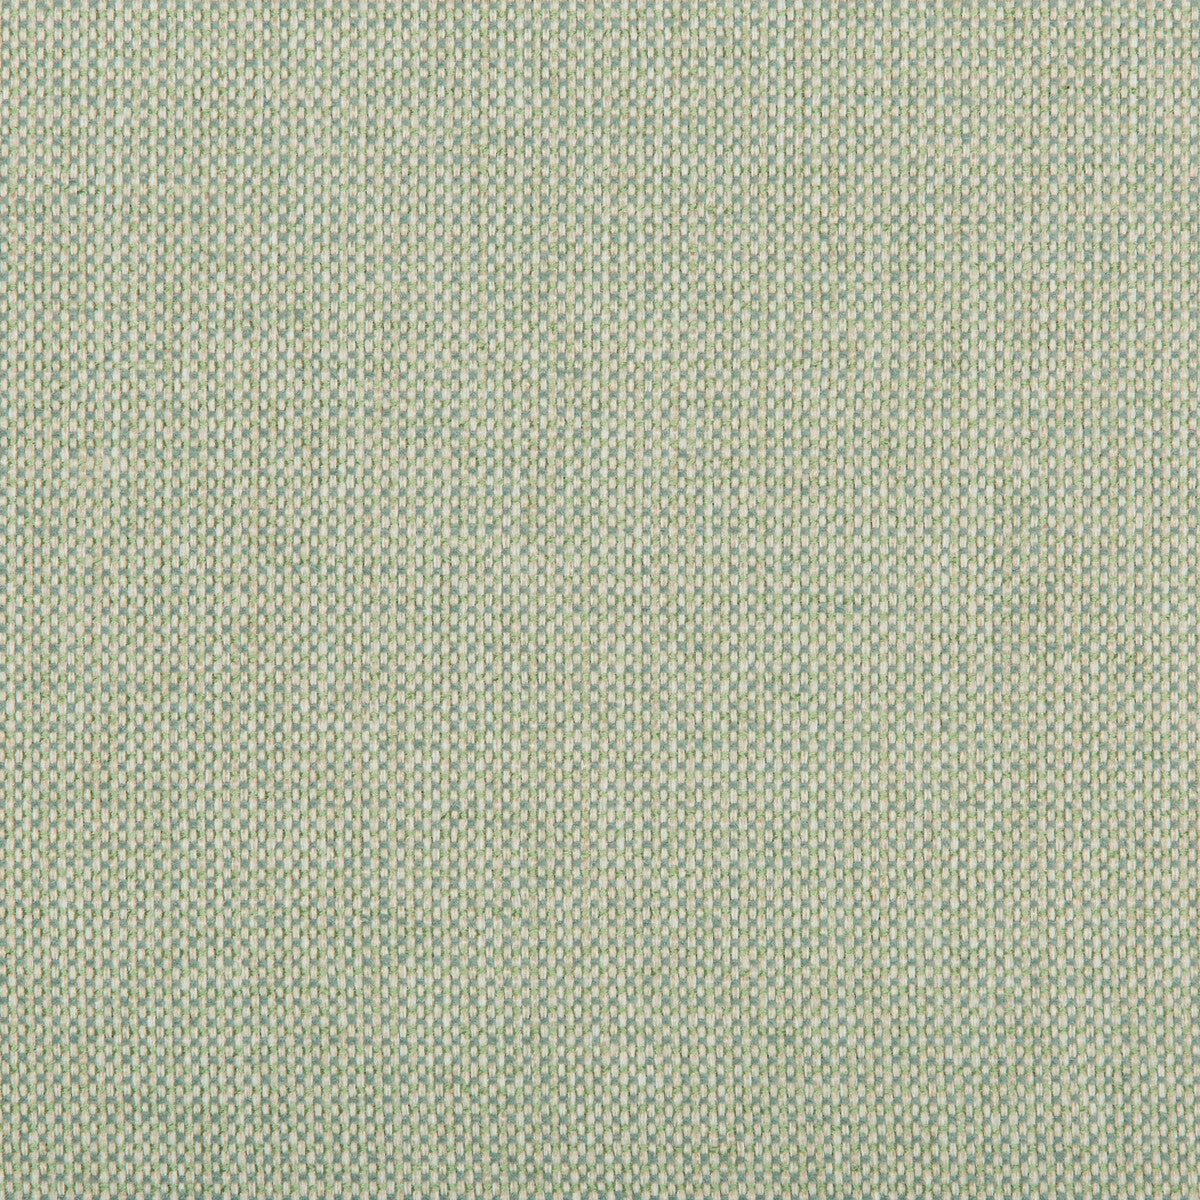 Burr fabric in seafoam color - pattern 35745.23.0 - by Kravet Contract in the Value Kravetarmor collection